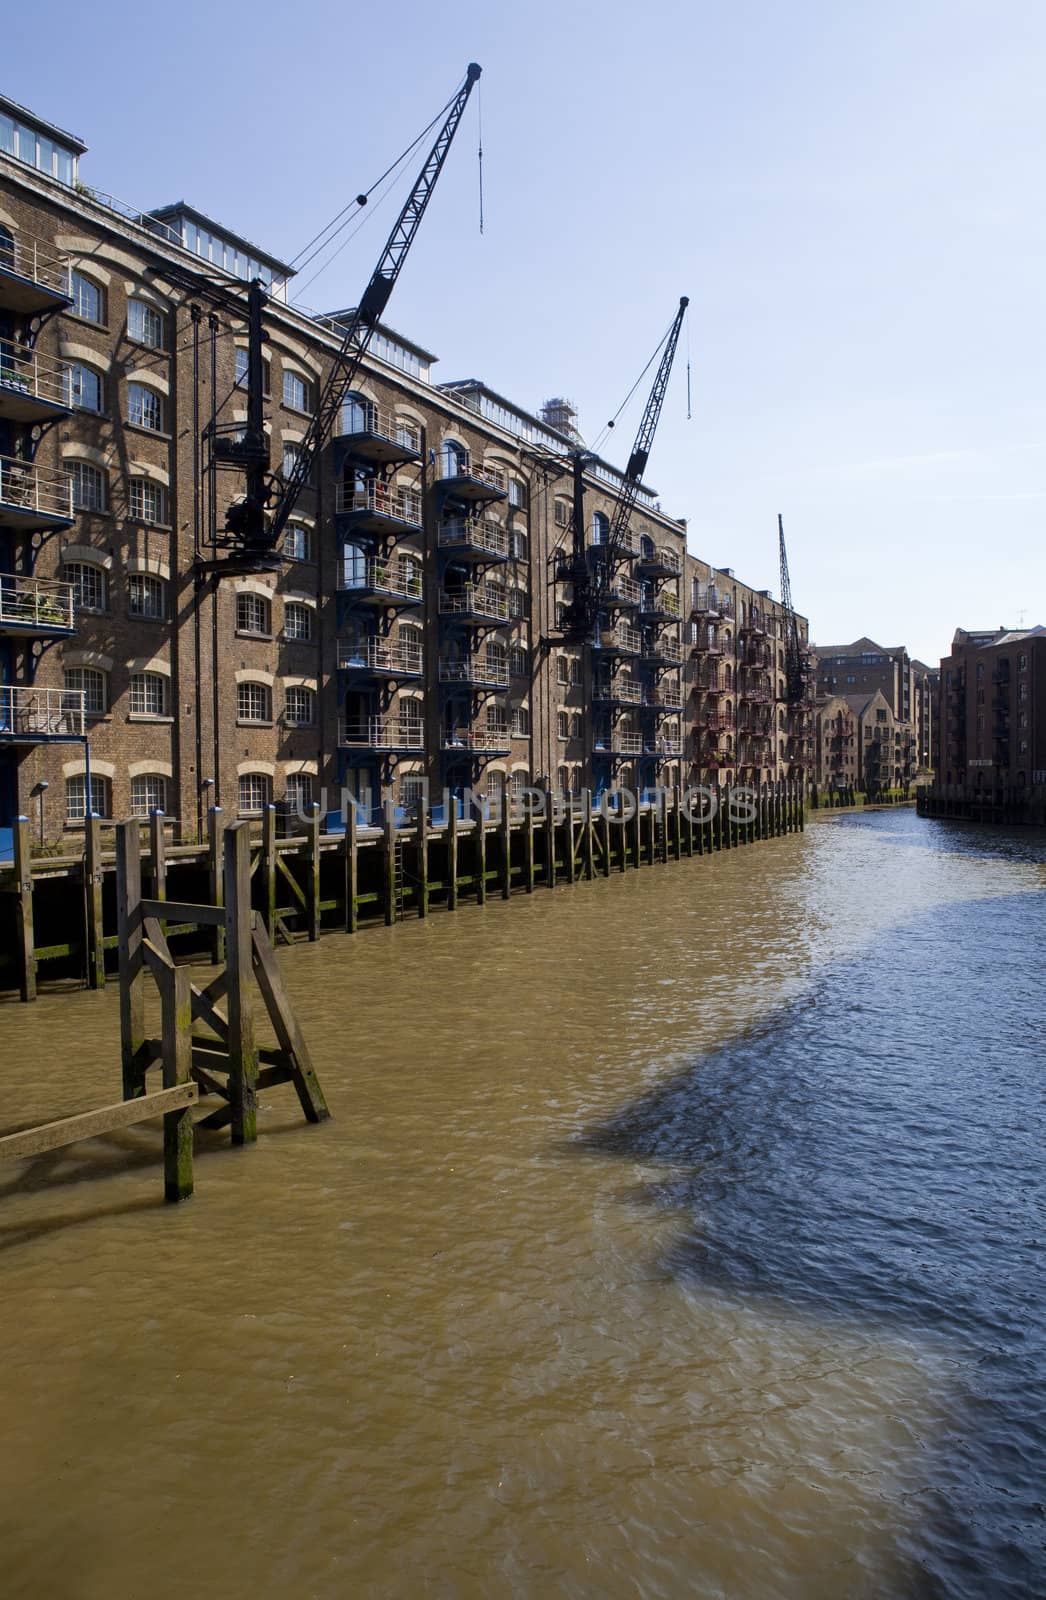 A view of St. Saviour's Dock in London.